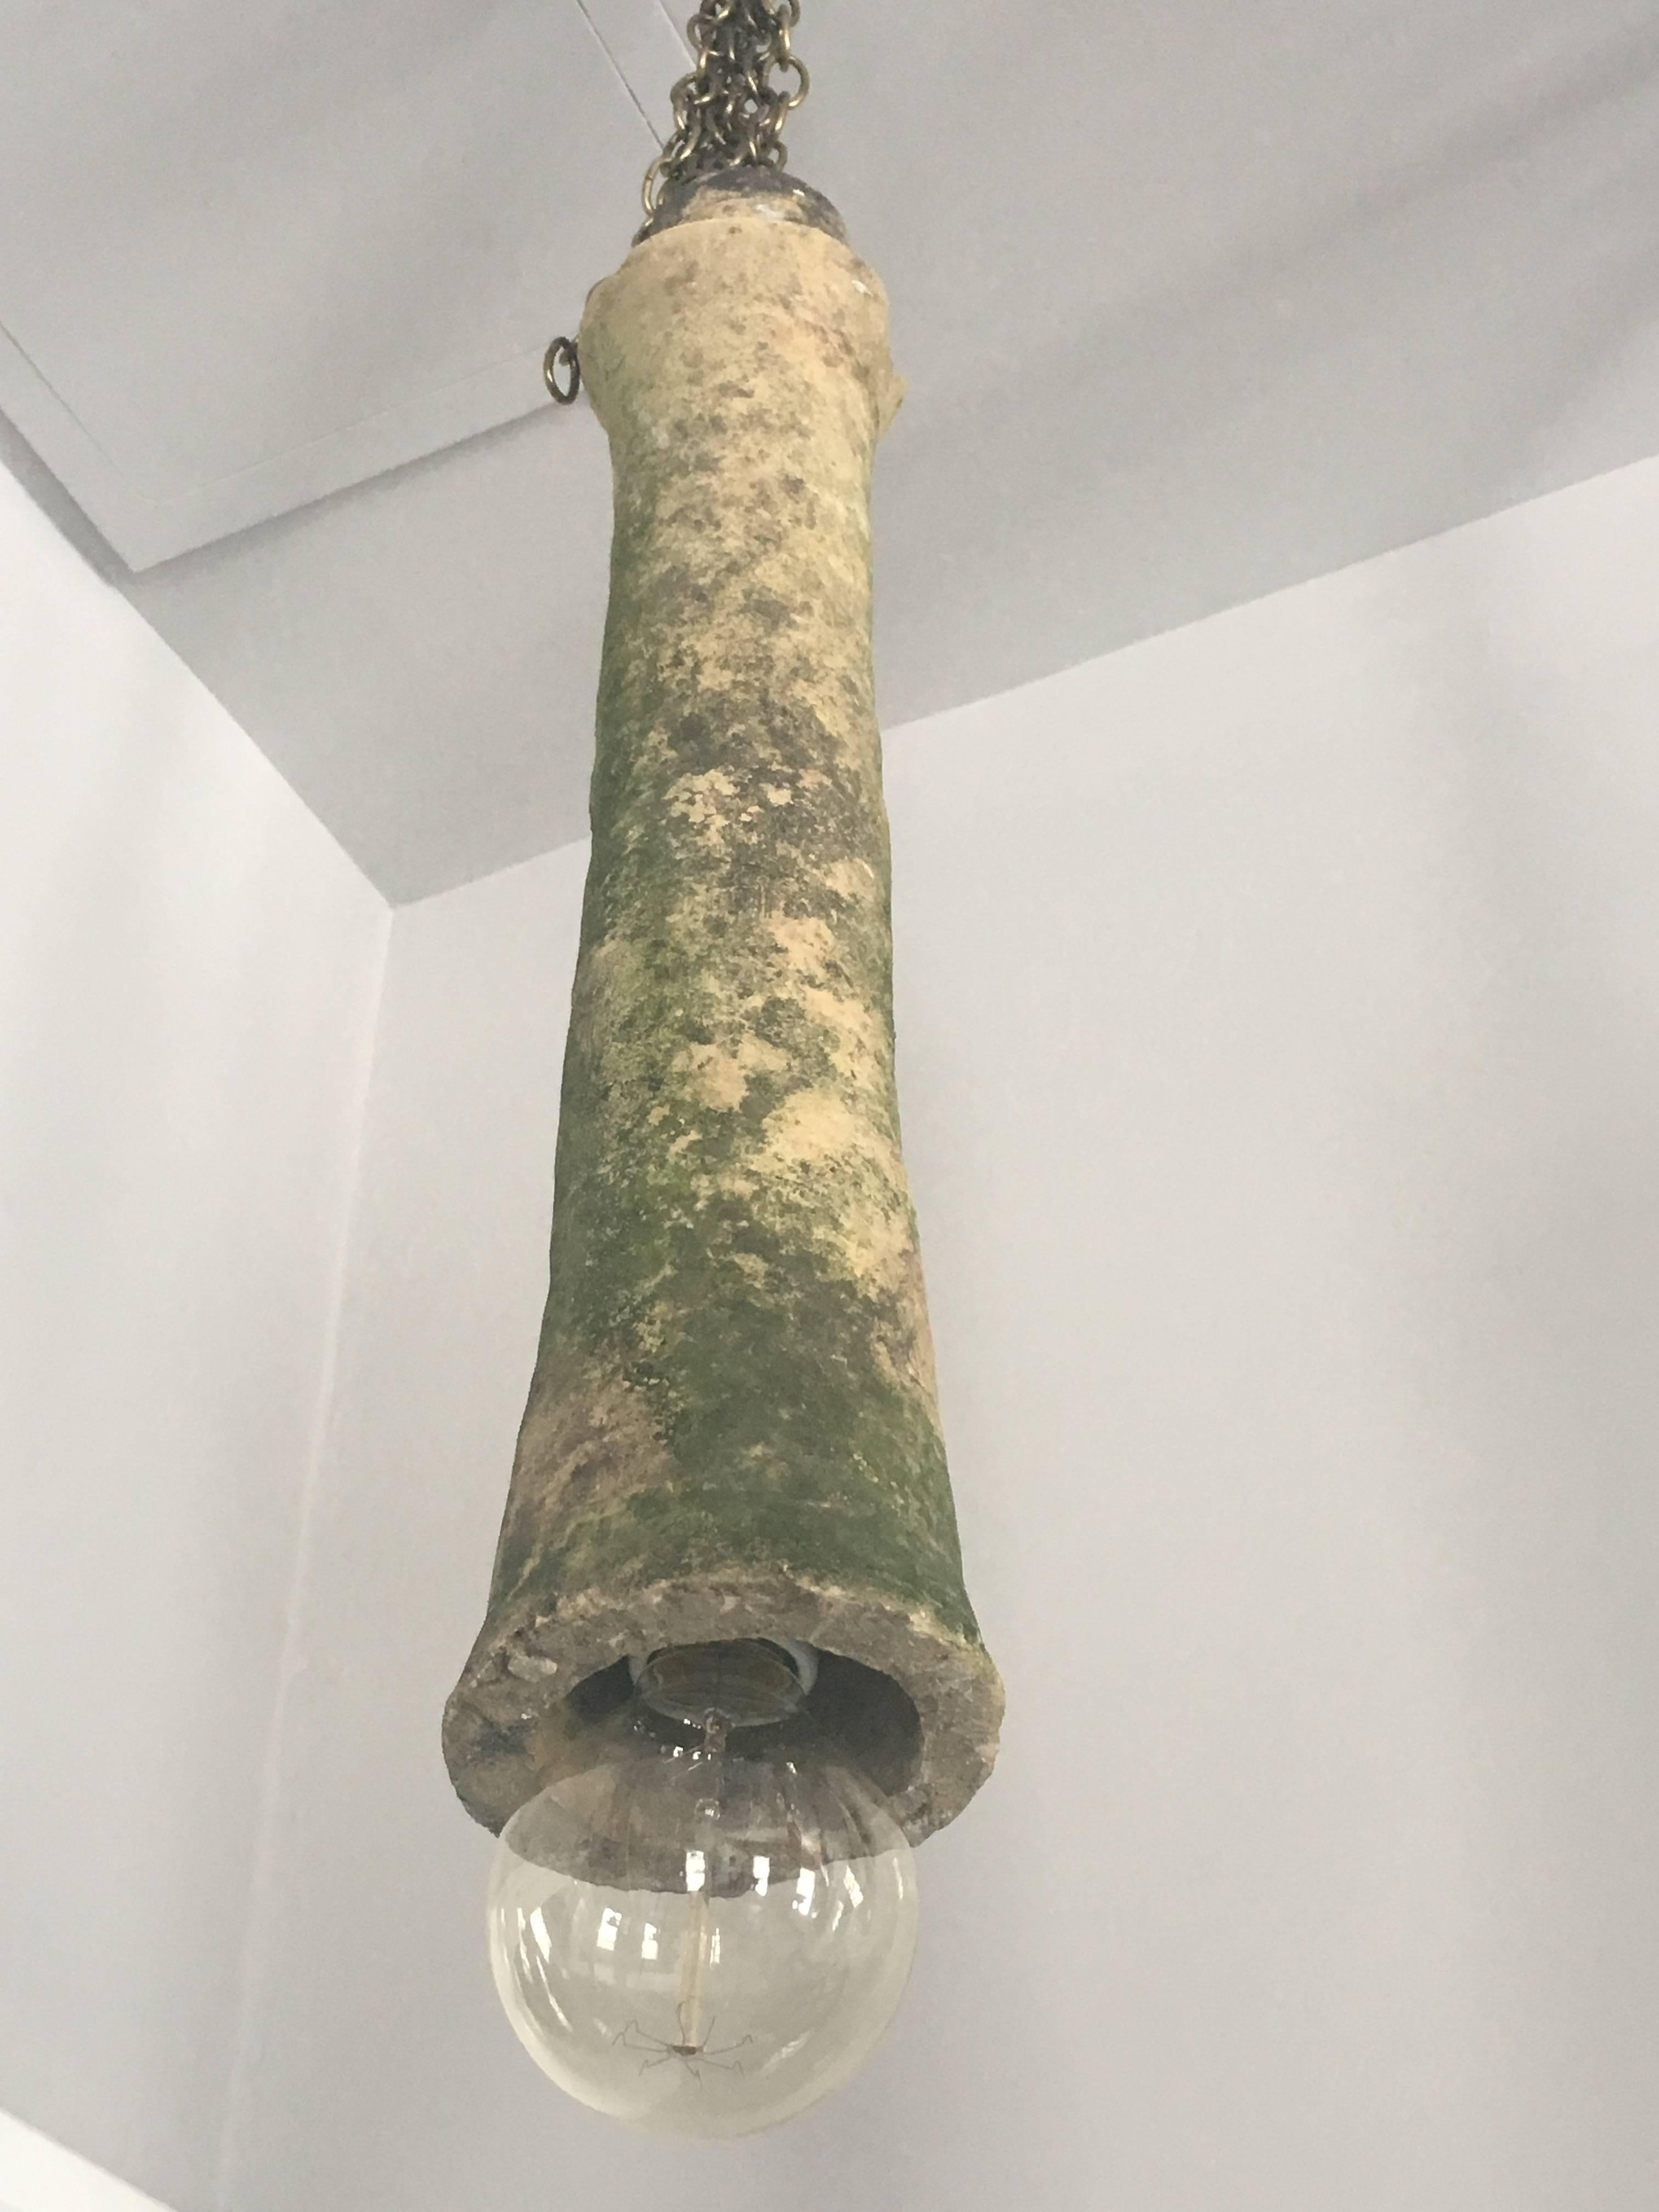 Now here's something you won't see every day! We found these wonderful weathered bisquit terracotta pipes in France and have converted them into hanging pendant lights. In terrific shape with only a few minor chips that do not affect their look or